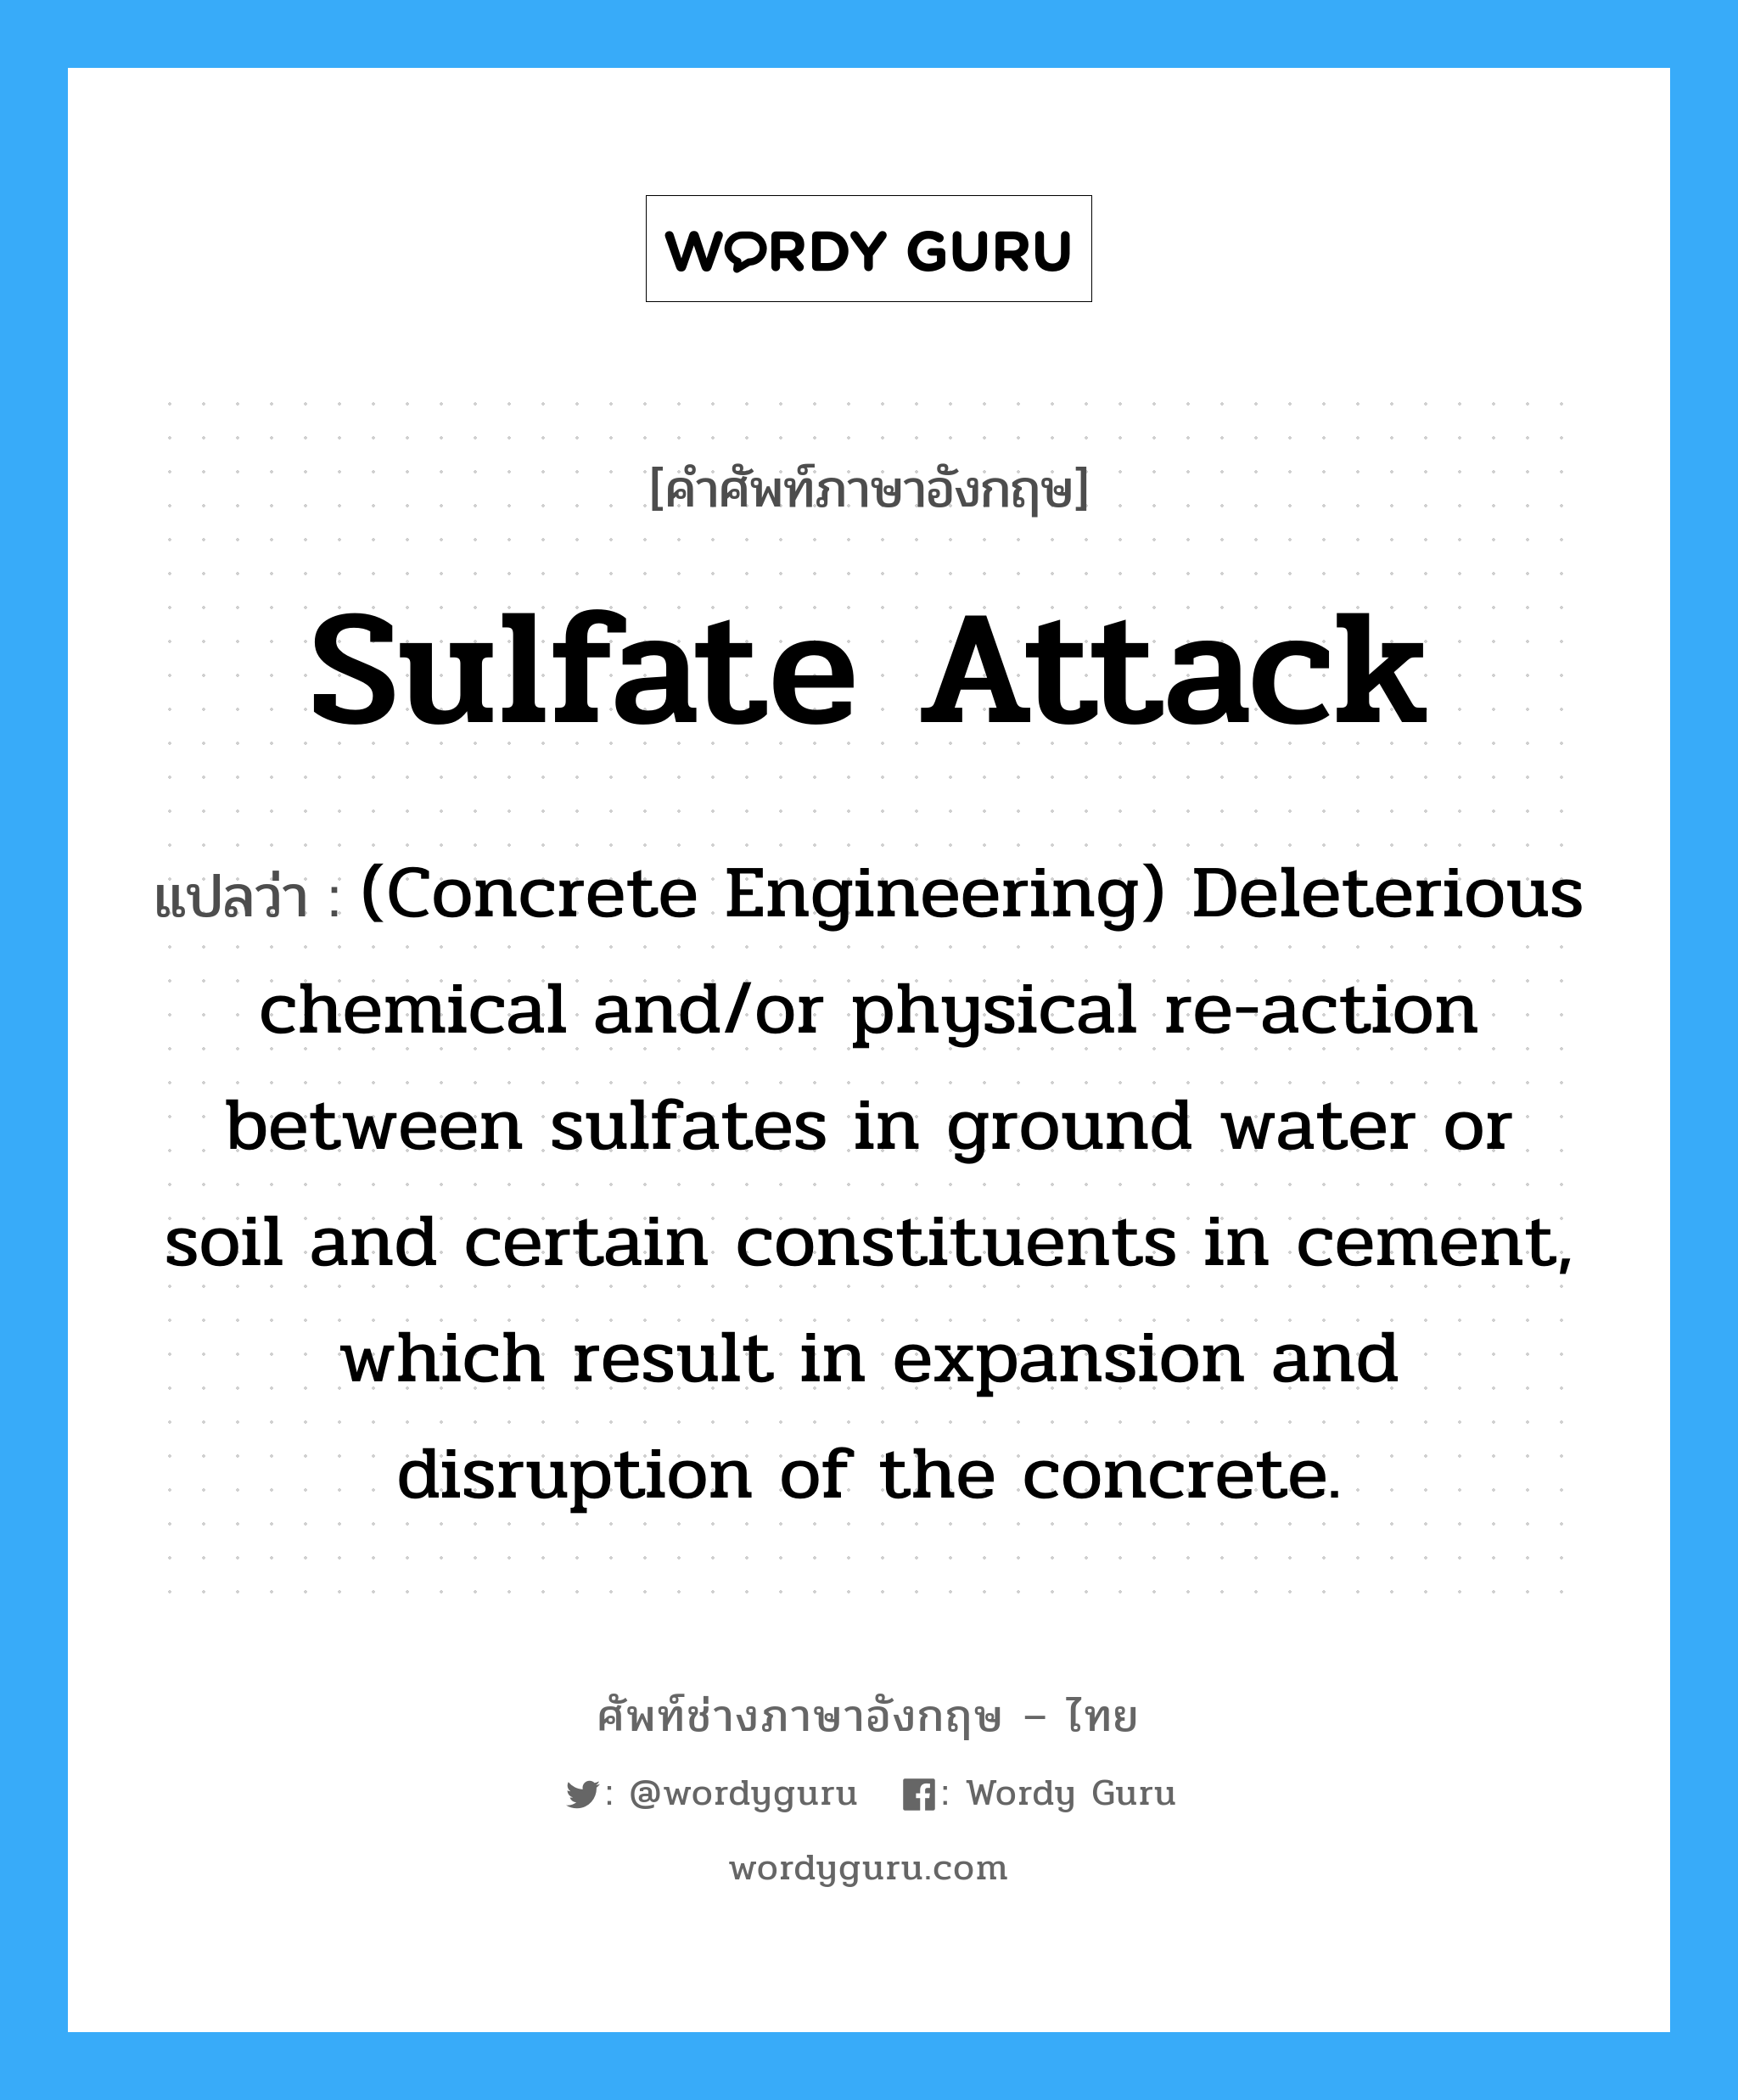 (Concrete Engineering) Deleterious chemical and/or physical re-action between sulfates in ground water or soil and certain constituents in cement, which result in expansion and disruption of the concrete. ภาษาอังกฤษ?, คำศัพท์ช่างภาษาอังกฤษ - ไทย (Concrete Engineering) Deleterious chemical and/or physical re-action between sulfates in ground water or soil and certain constituents in cement, which result in expansion and disruption of the concrete. คำศัพท์ภาษาอังกฤษ (Concrete Engineering) Deleterious chemical and/or physical re-action between sulfates in ground water or soil and certain constituents in cement, which result in expansion and disruption of the concrete. แปลว่า Sulfate Attack